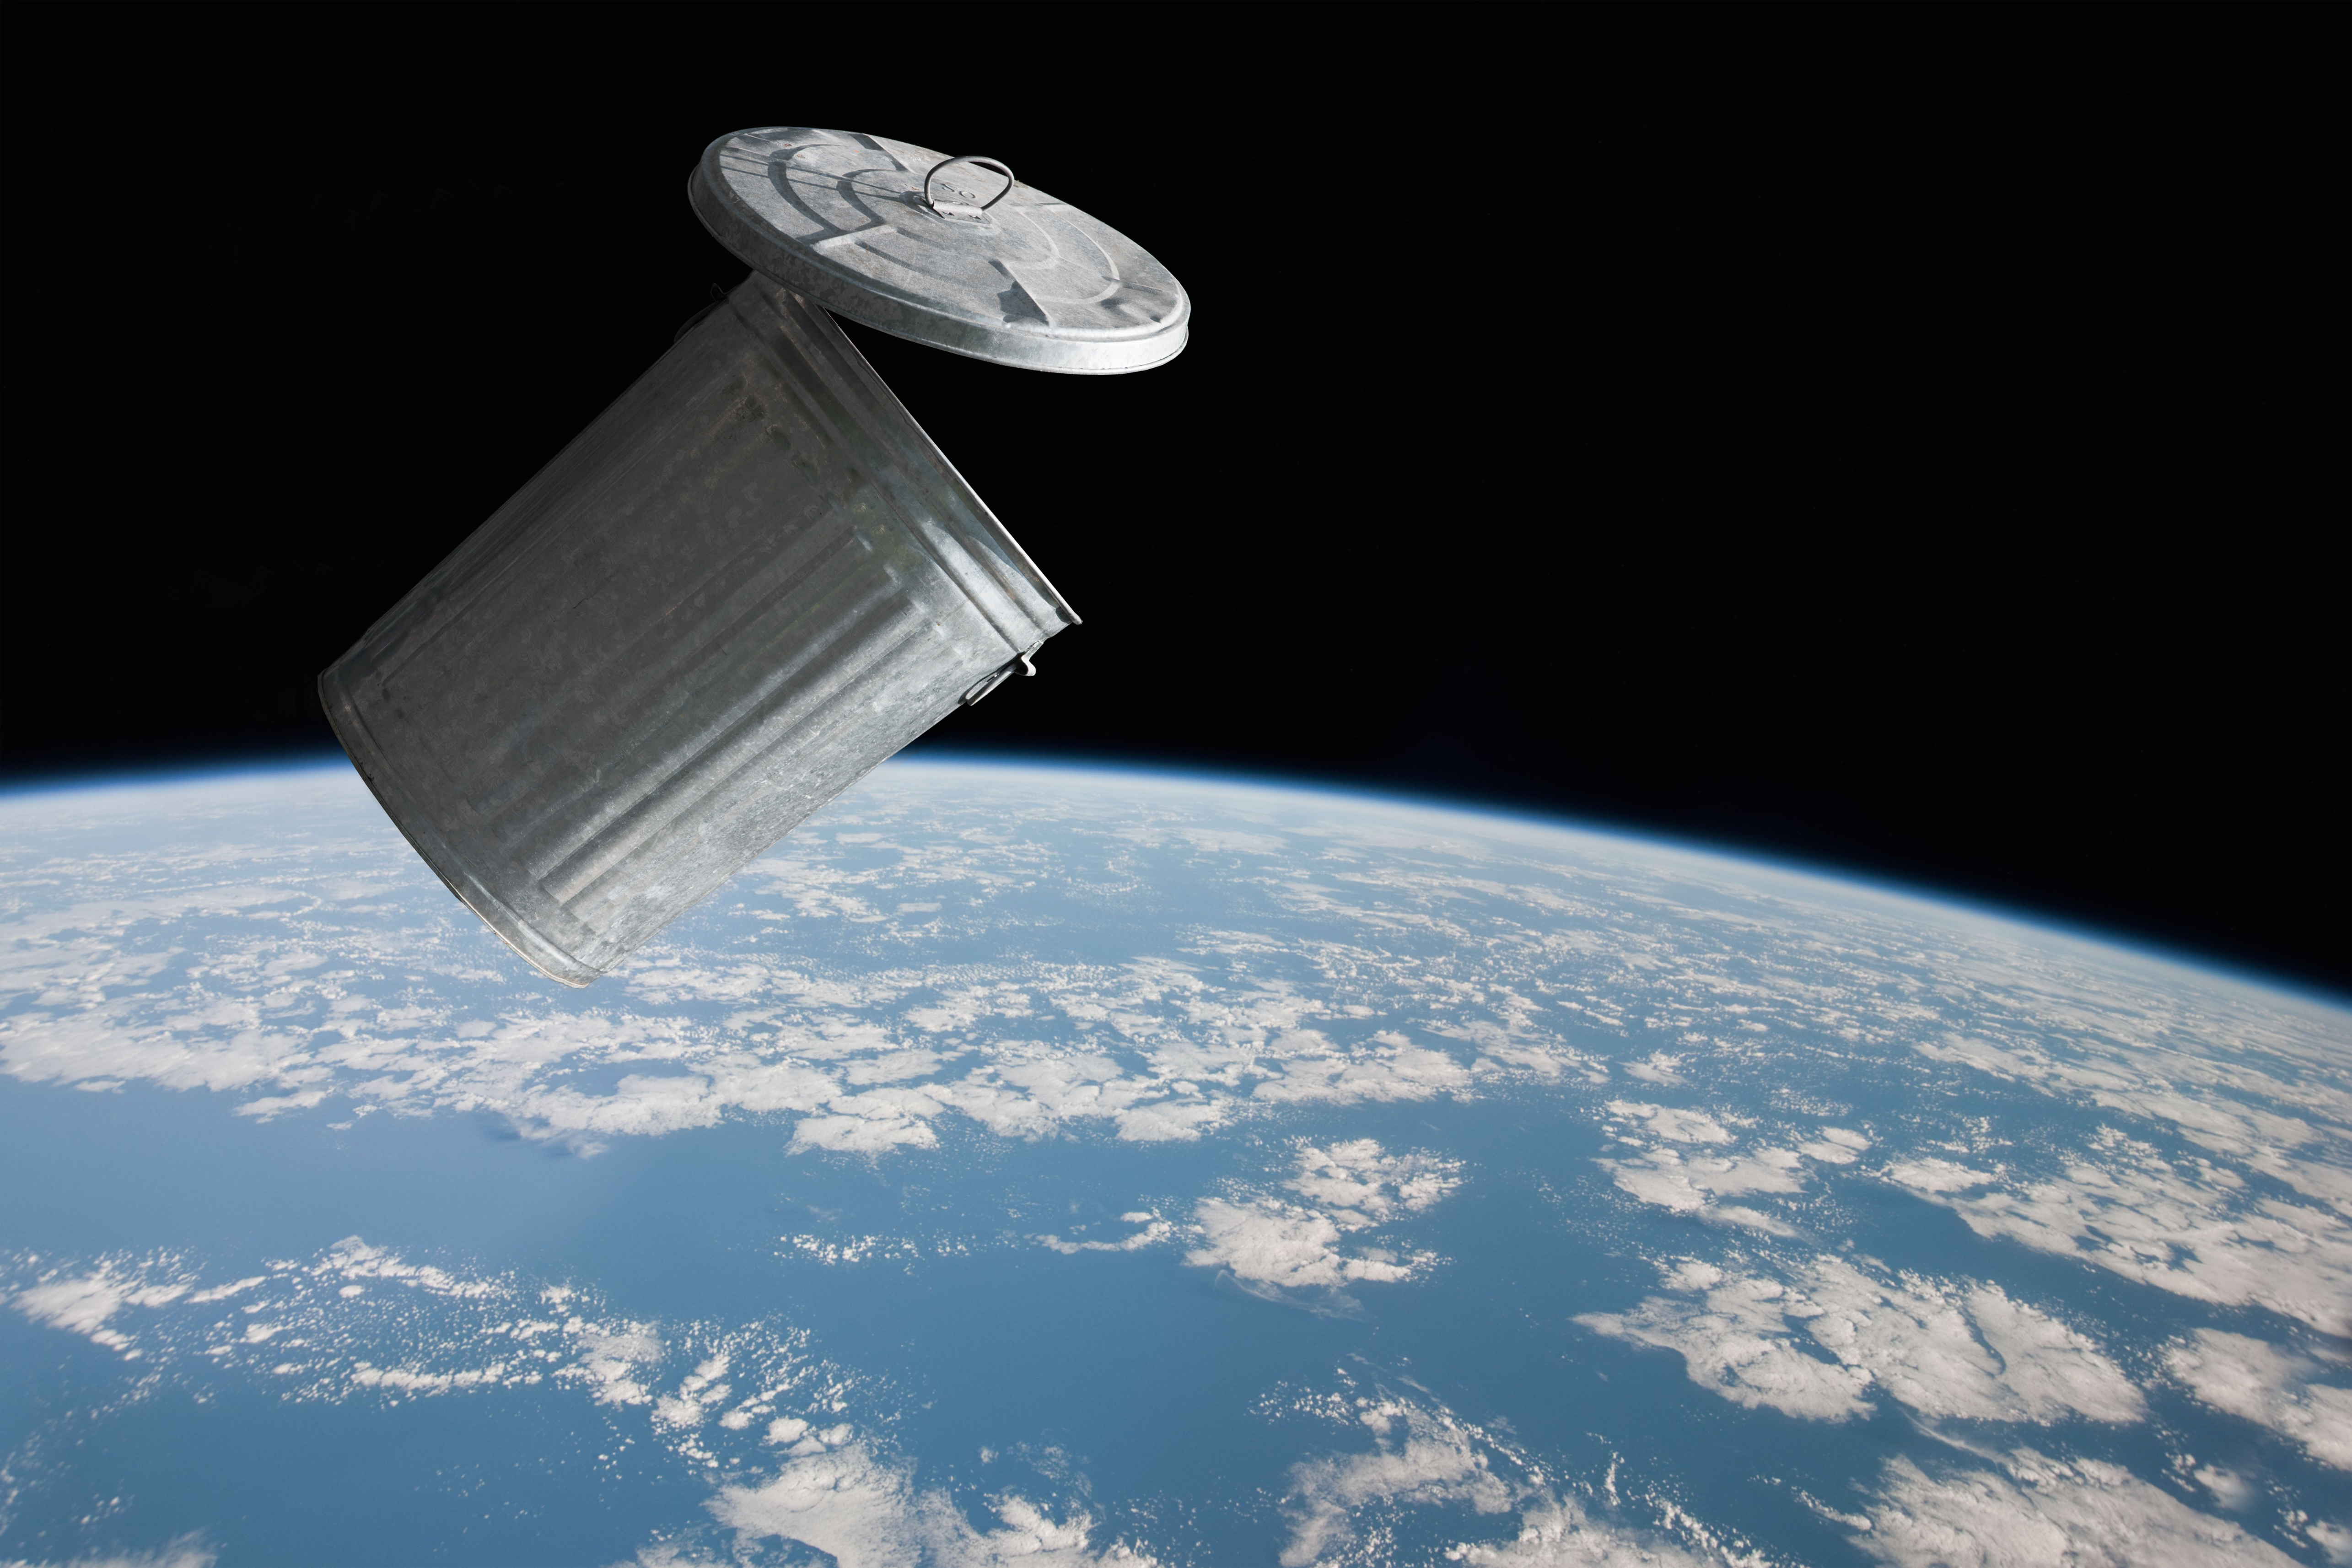 A trash can in space.